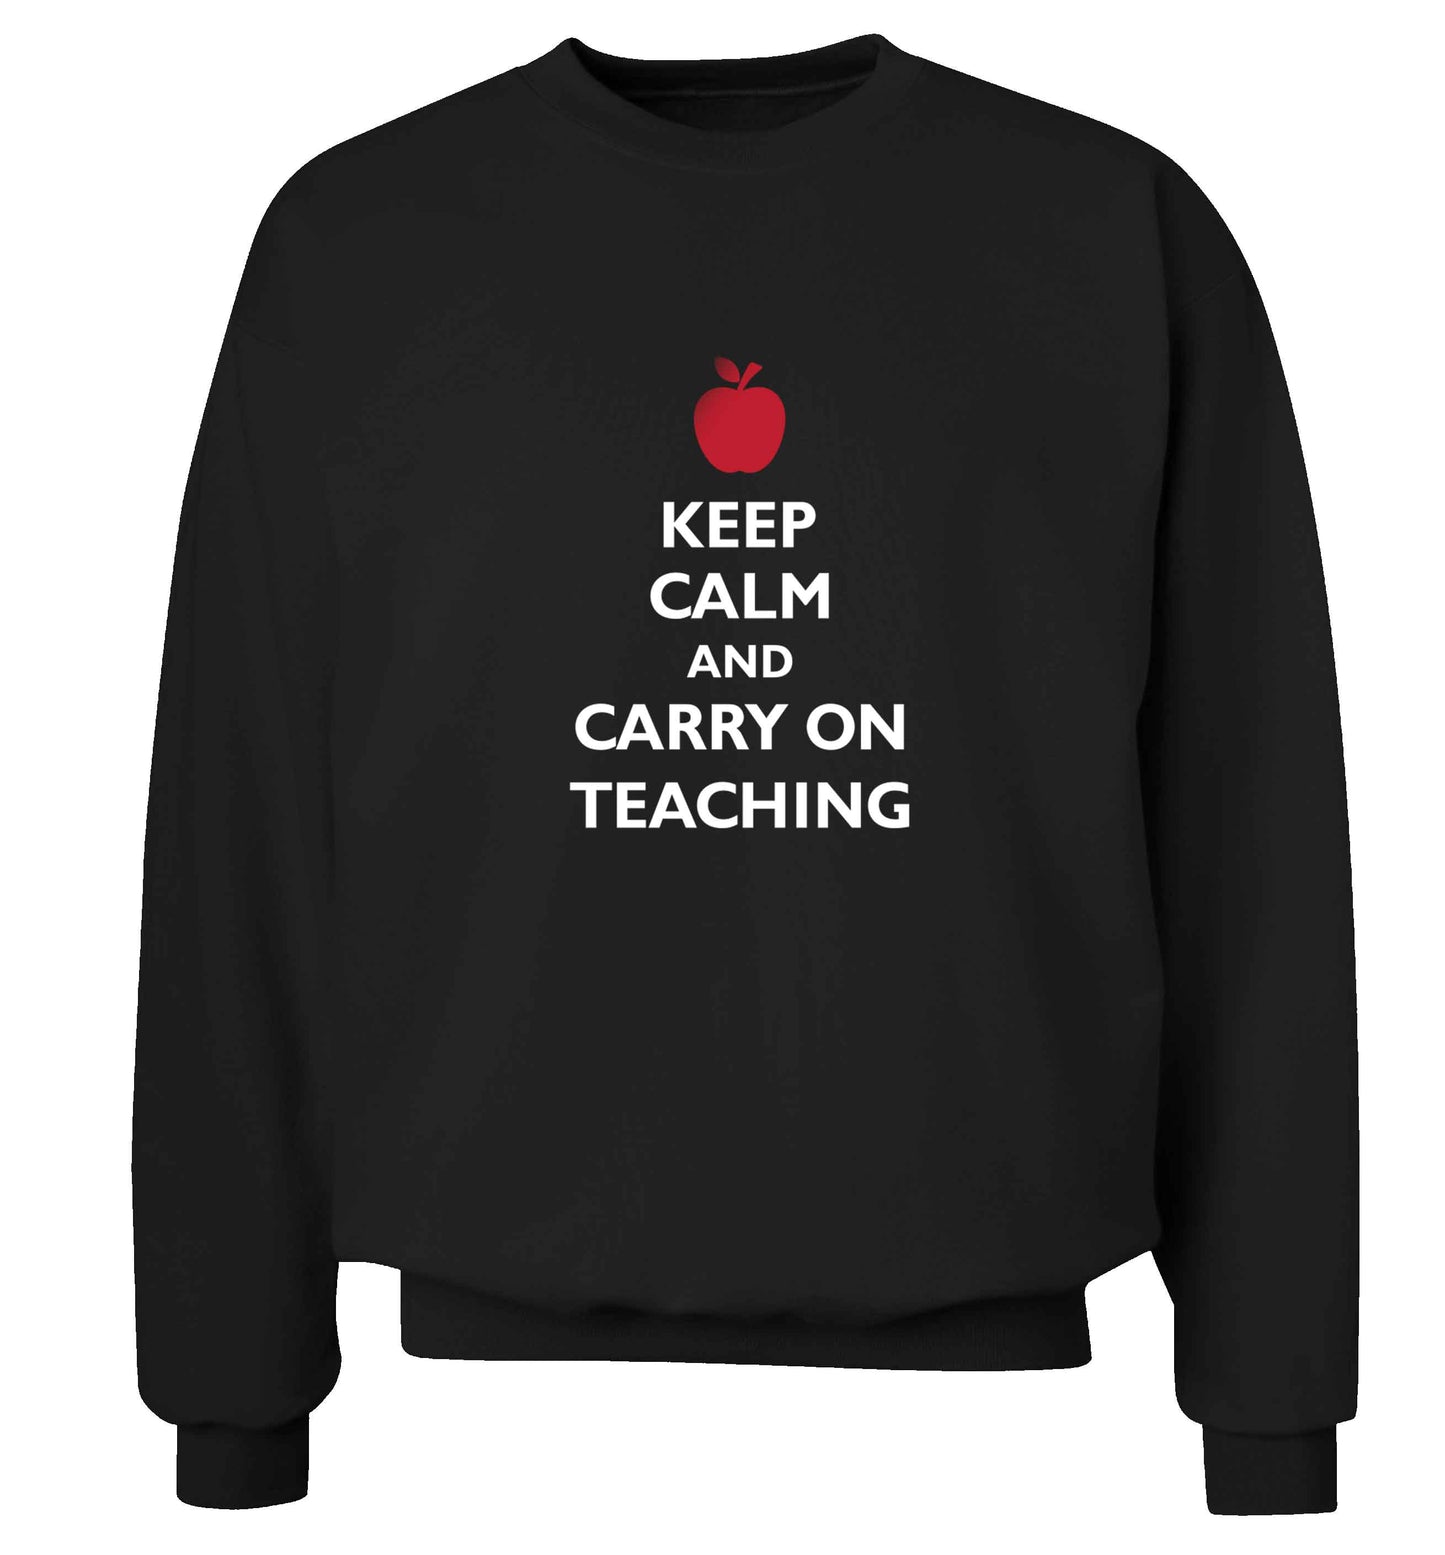 Keep calm and carry on teaching adult's unisex black sweater 2XL